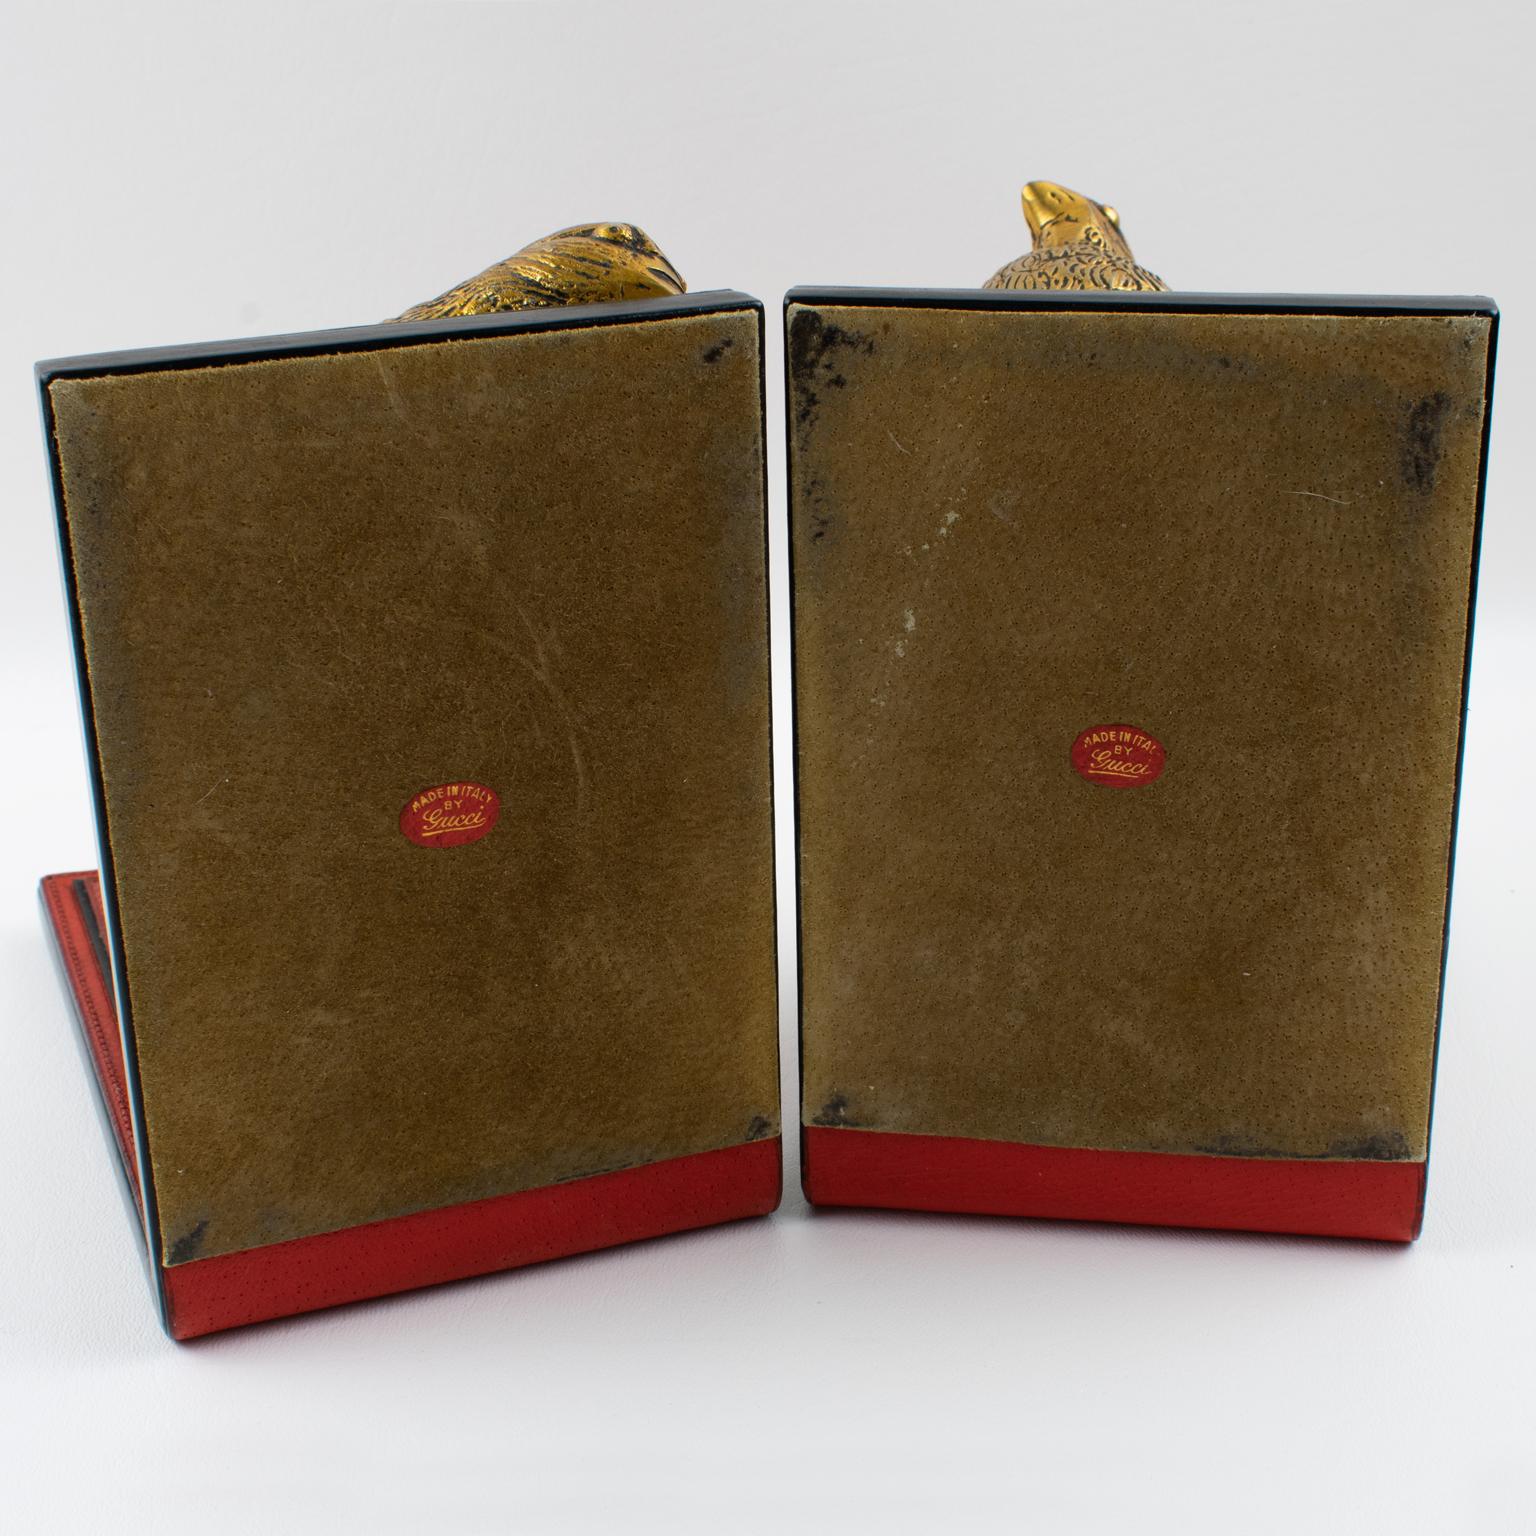 Gucci Italy Hand-Stitched Red Leather Bookends with Gilt Metal Partridges, 1970s 6